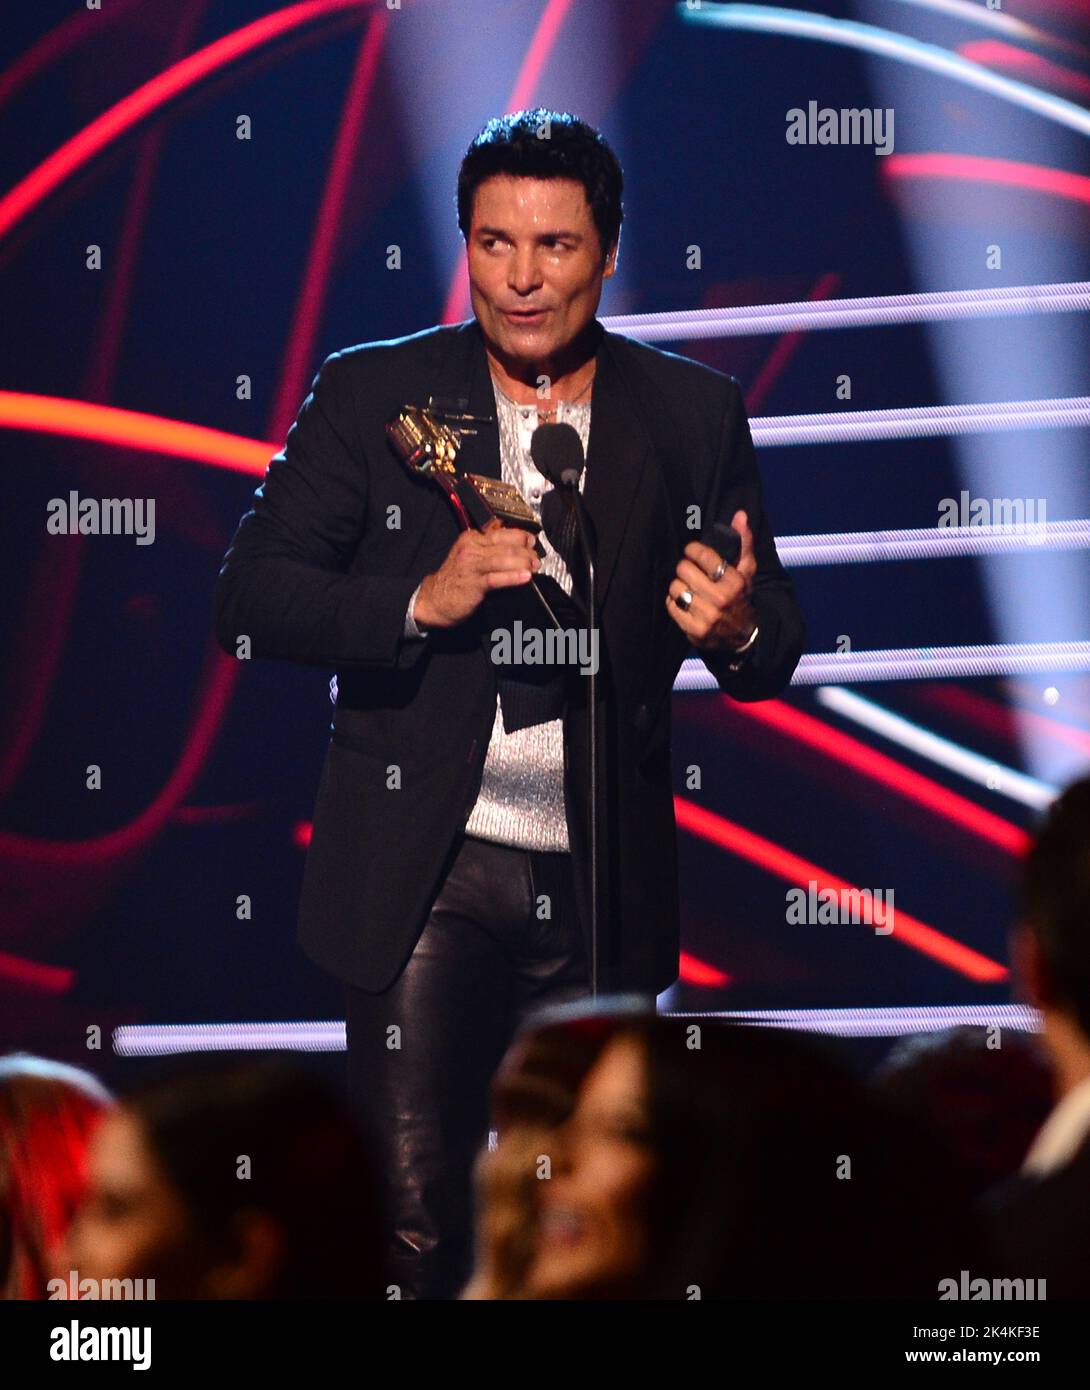 Coral Gables, USA. 29th Sep, 2022. CORAL GABLES, FLORIDA - SEPTEMBER 29: Chayanne accepting the Billboard Icon Award onstage at the 2022 Billboard Latin Music Awards at Watsco Center on September 29, 2022 in Coral Gables, Florida. (Photo by JL/Sipa USA) Credit: Sipa USA/Alamy Live News Stock Photo